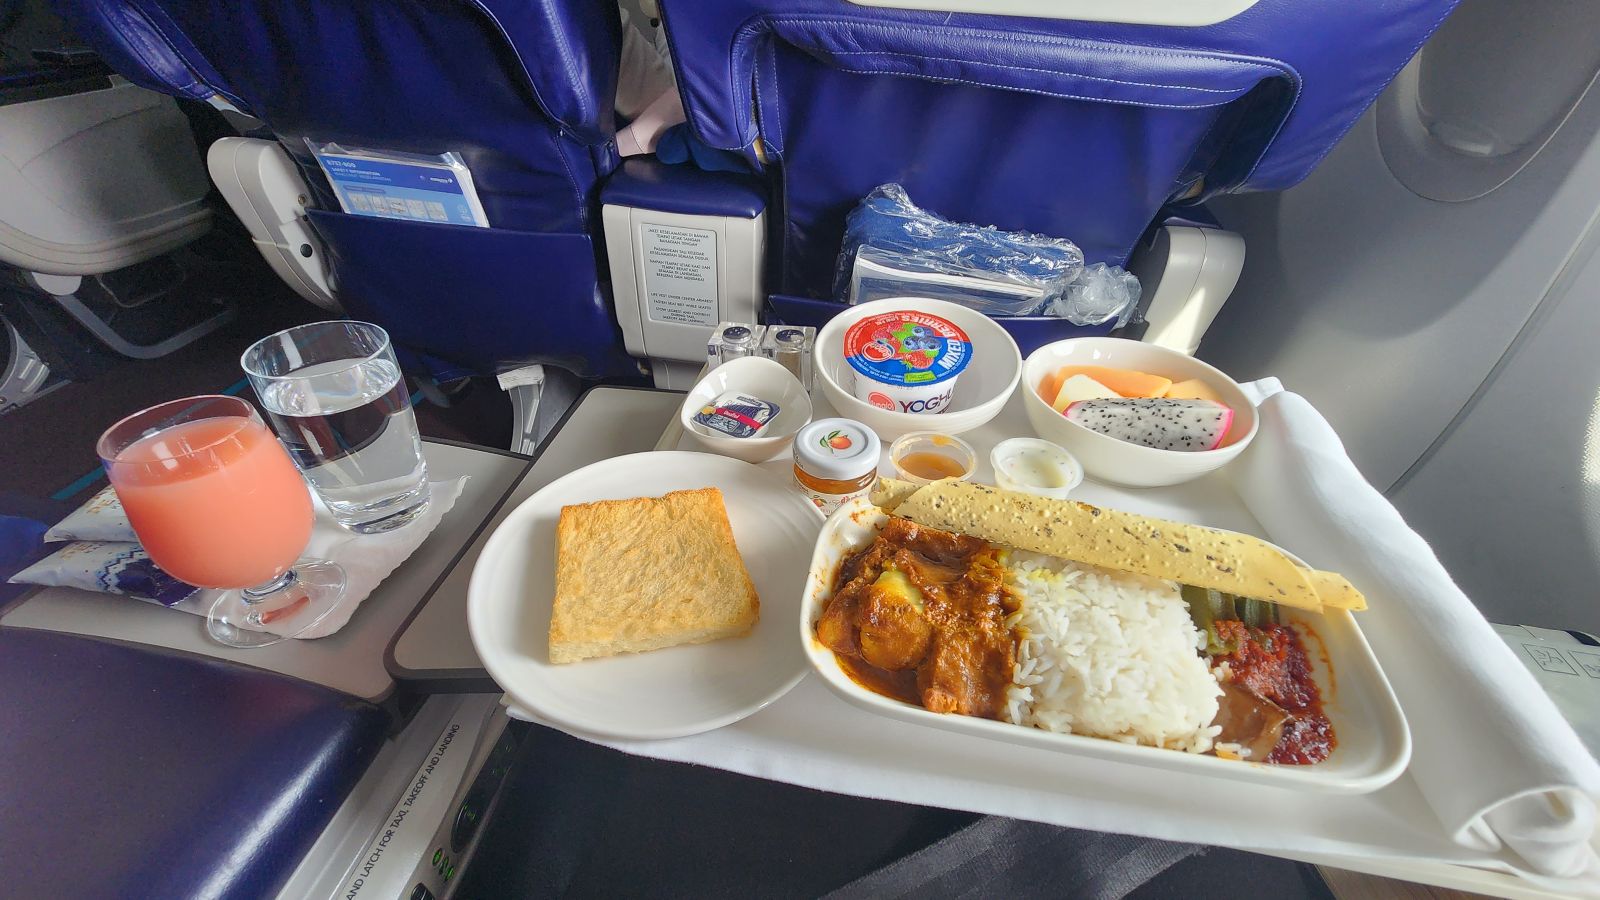 Malaysia Airlines Business Class meal from KUL-KTM